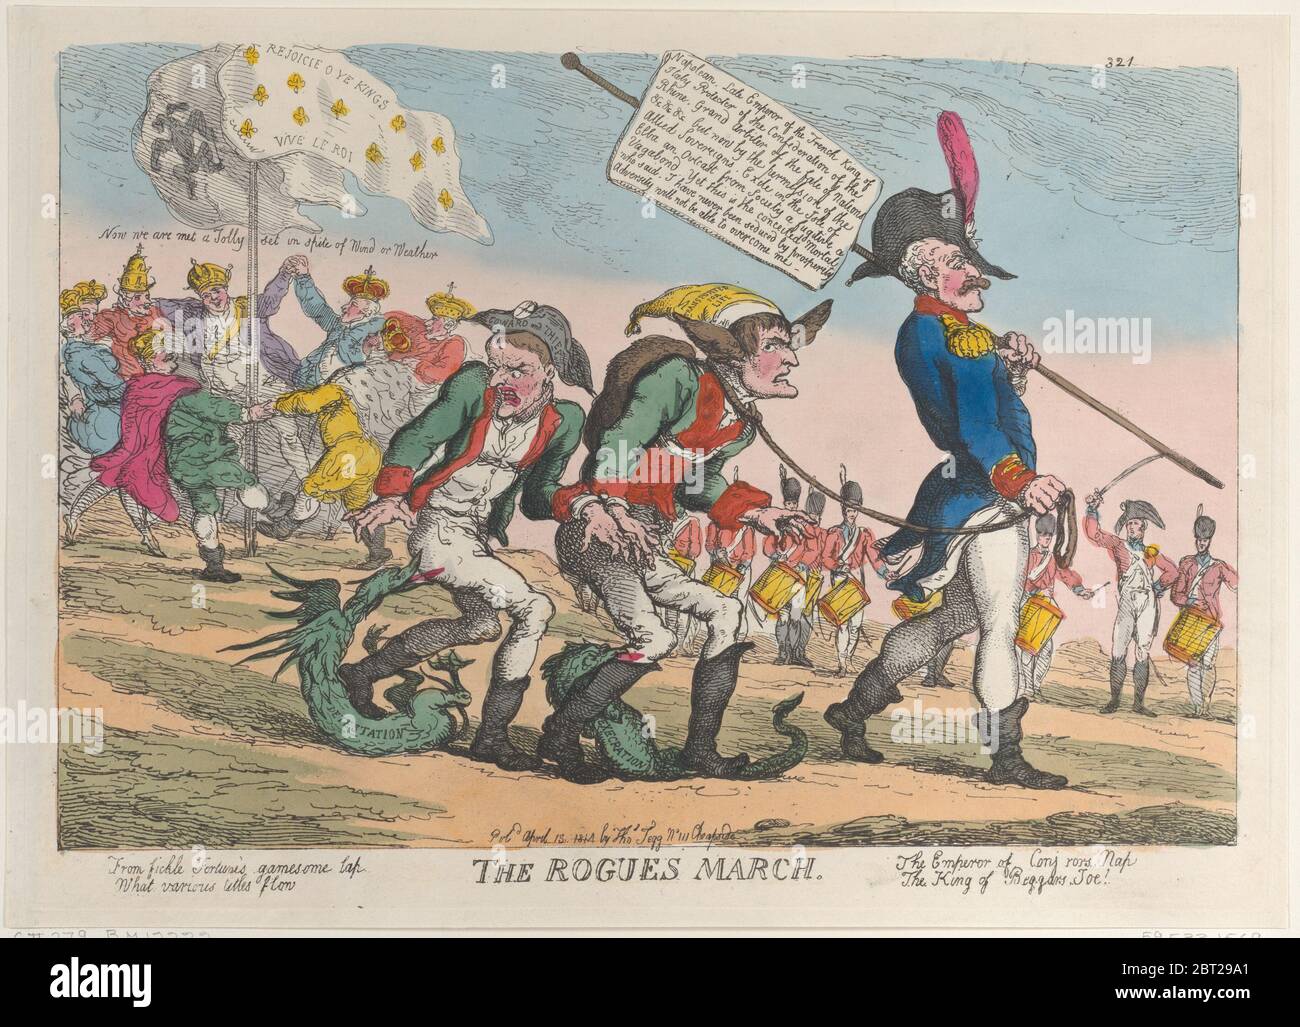 The Rogues March, April 12, 1814. Stock Photo